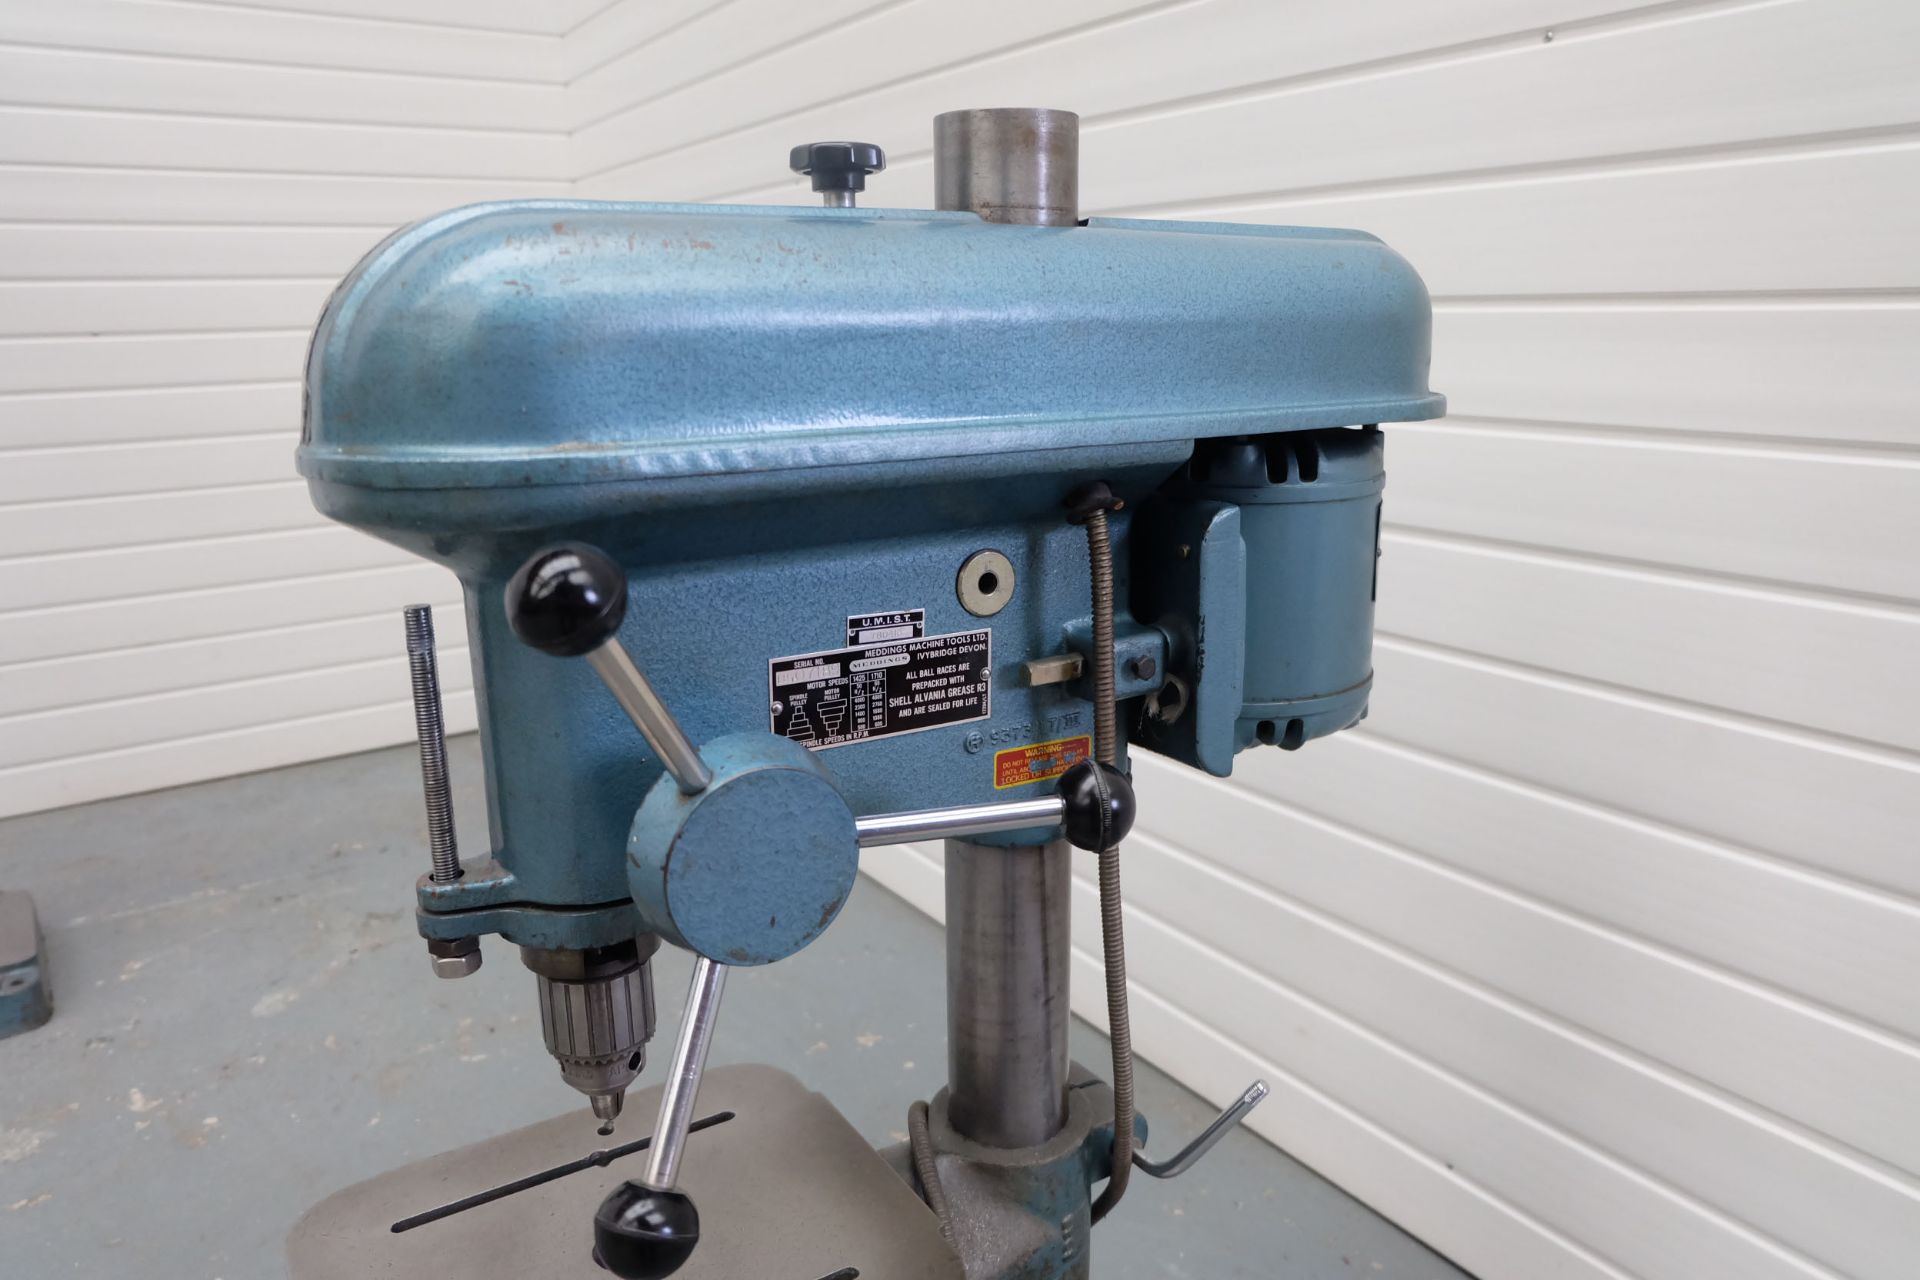 Meddings Type LB1 Bench Drill. - Image 2 of 6